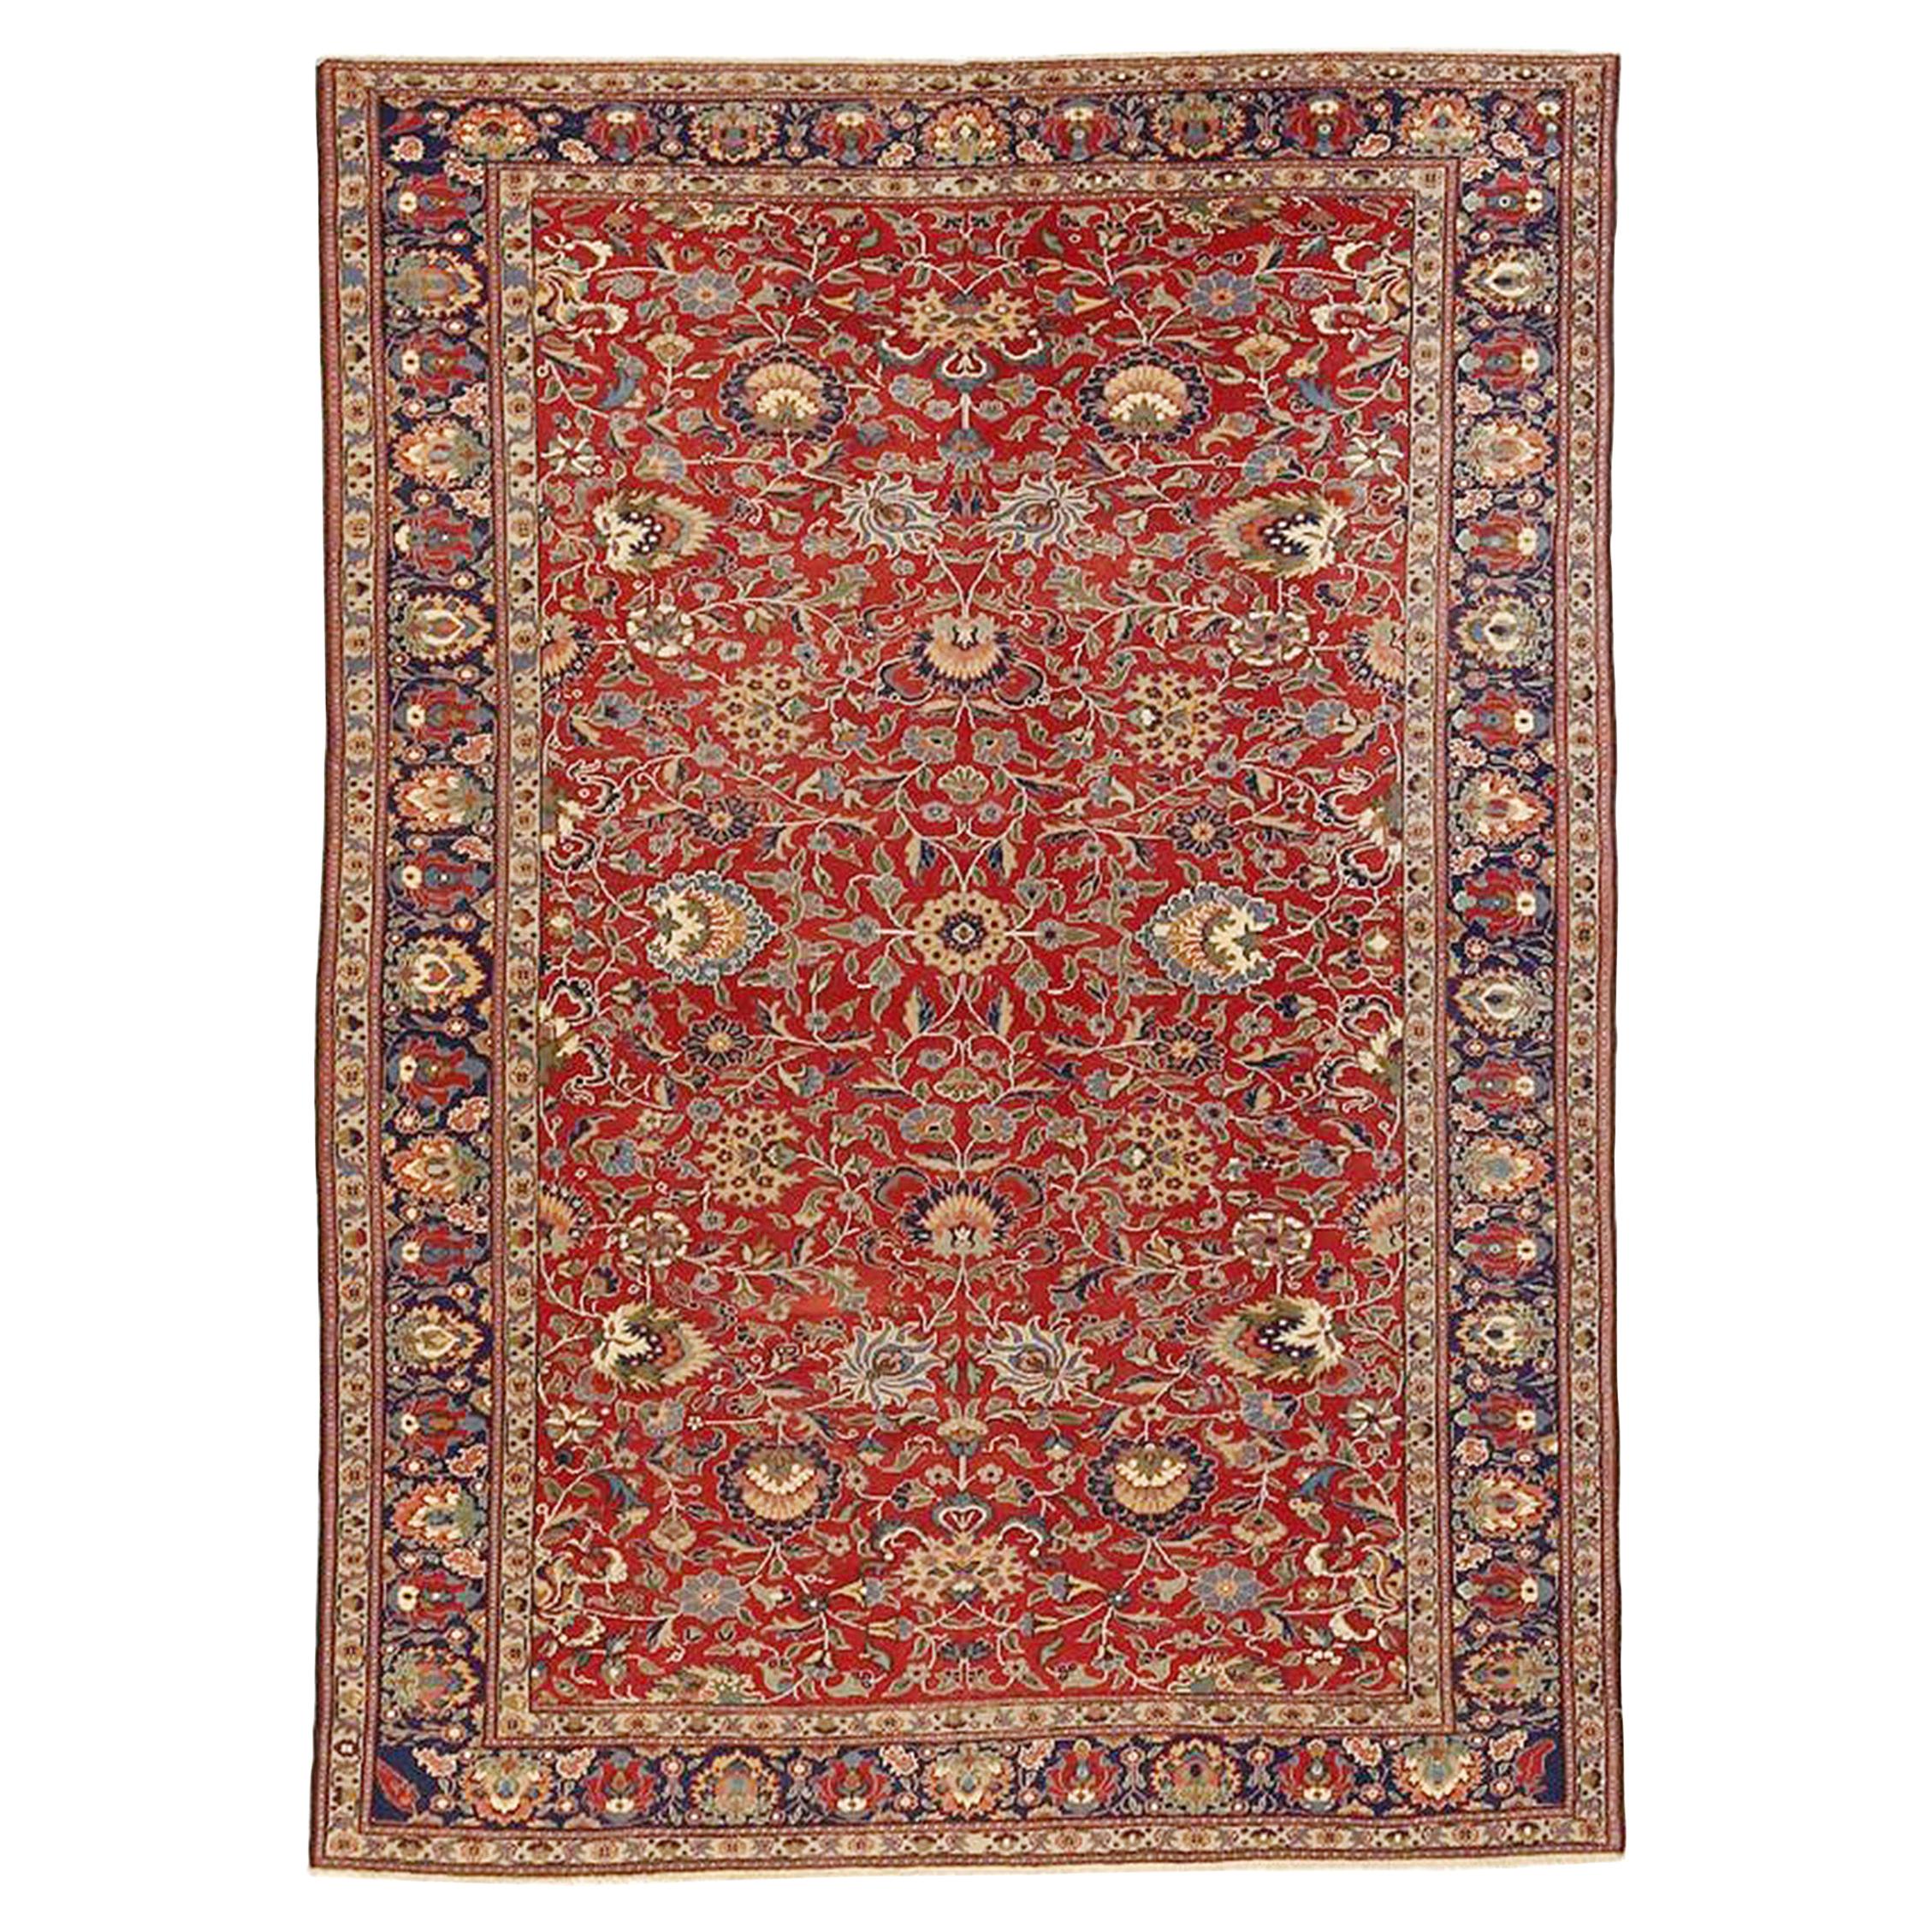 1920s Turkish Sivas Rug with Navy and Gray Floral Motifs on Red Field